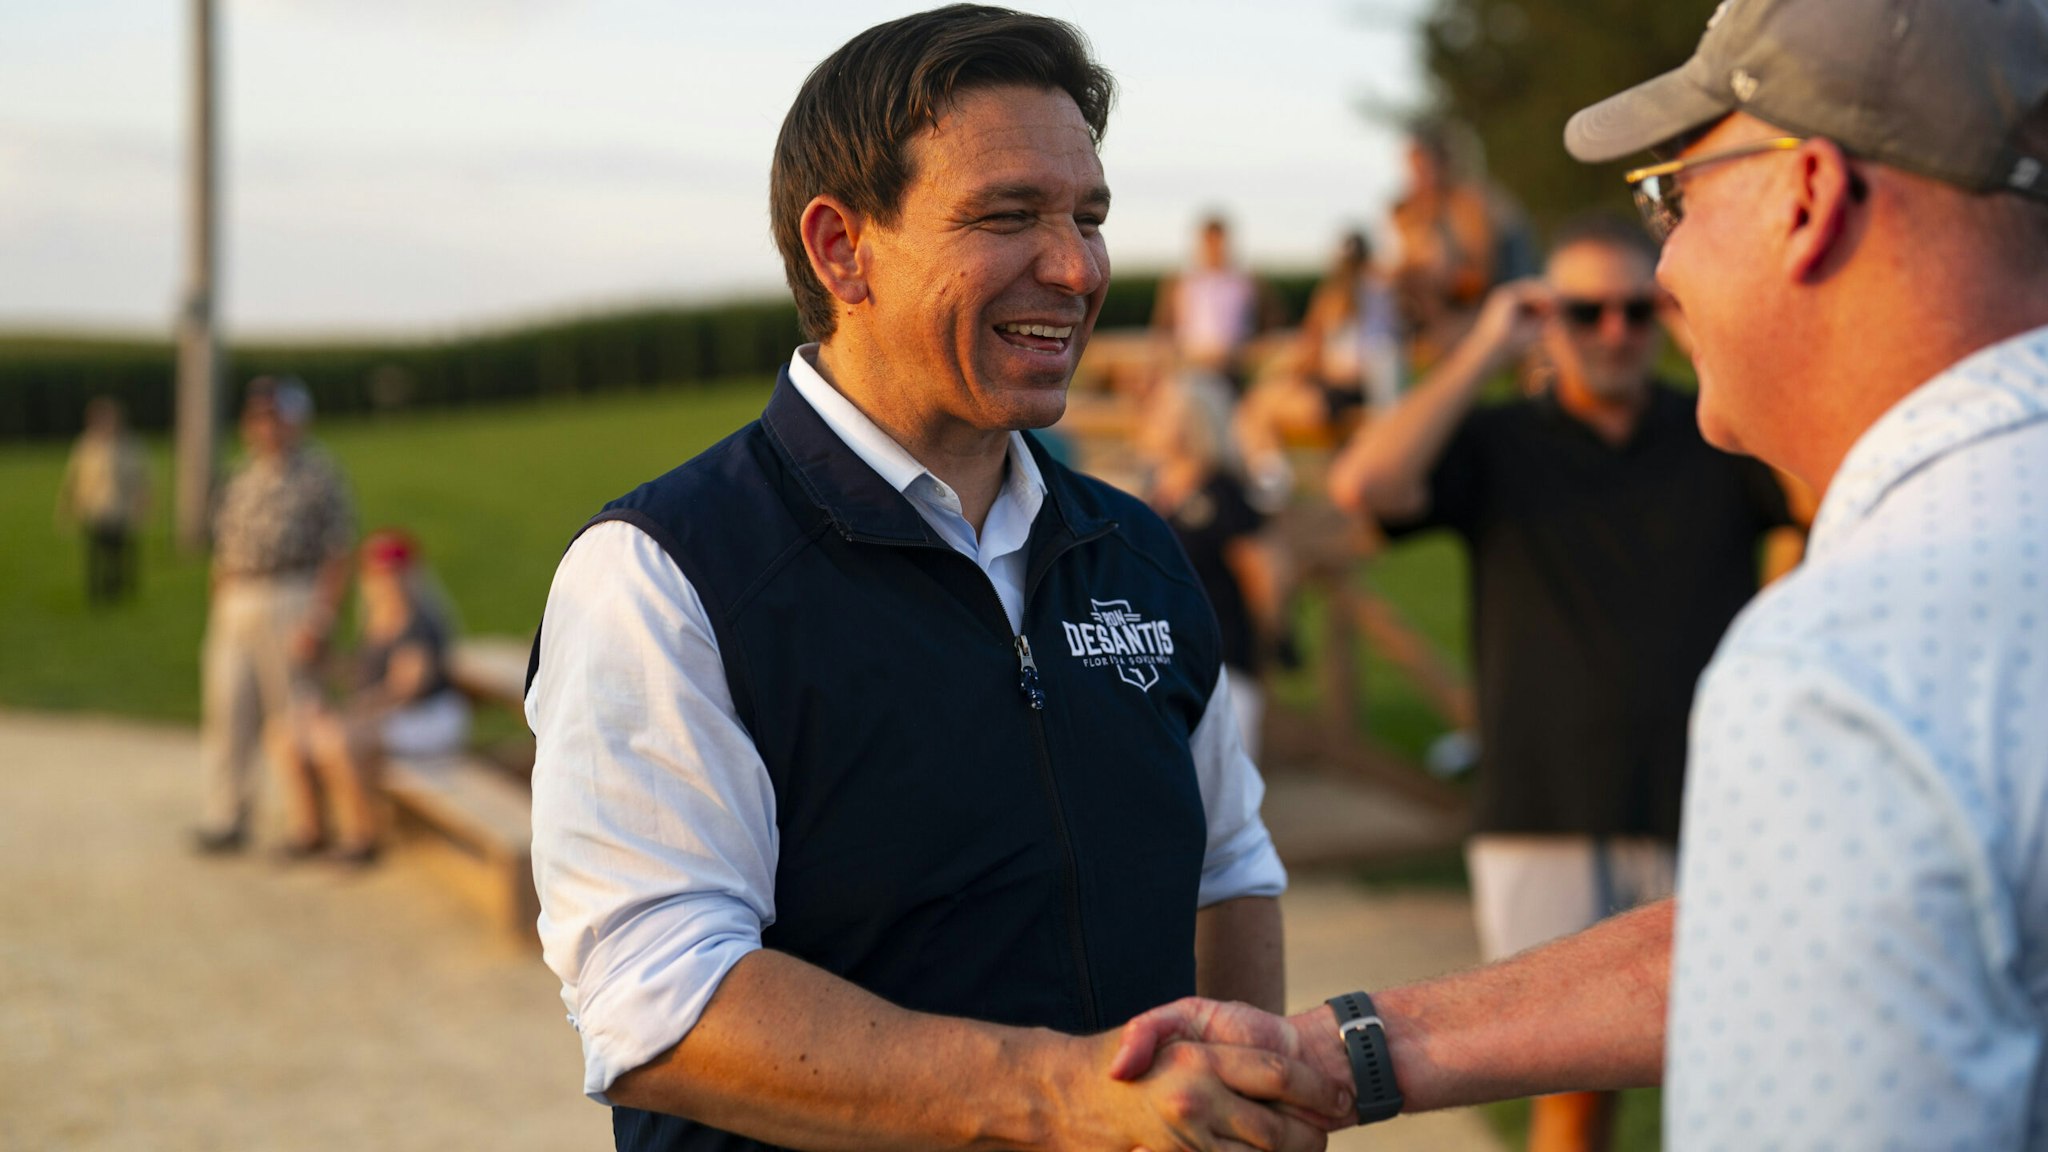 Ron DeSantis, governor of Florida and 2024 Republican presidential candidate, shakes hands with an attendee during a campaign stop at the Field of Dreams in Dyersville, Iowa, US, on Thursday, Aug. 24, 2023.